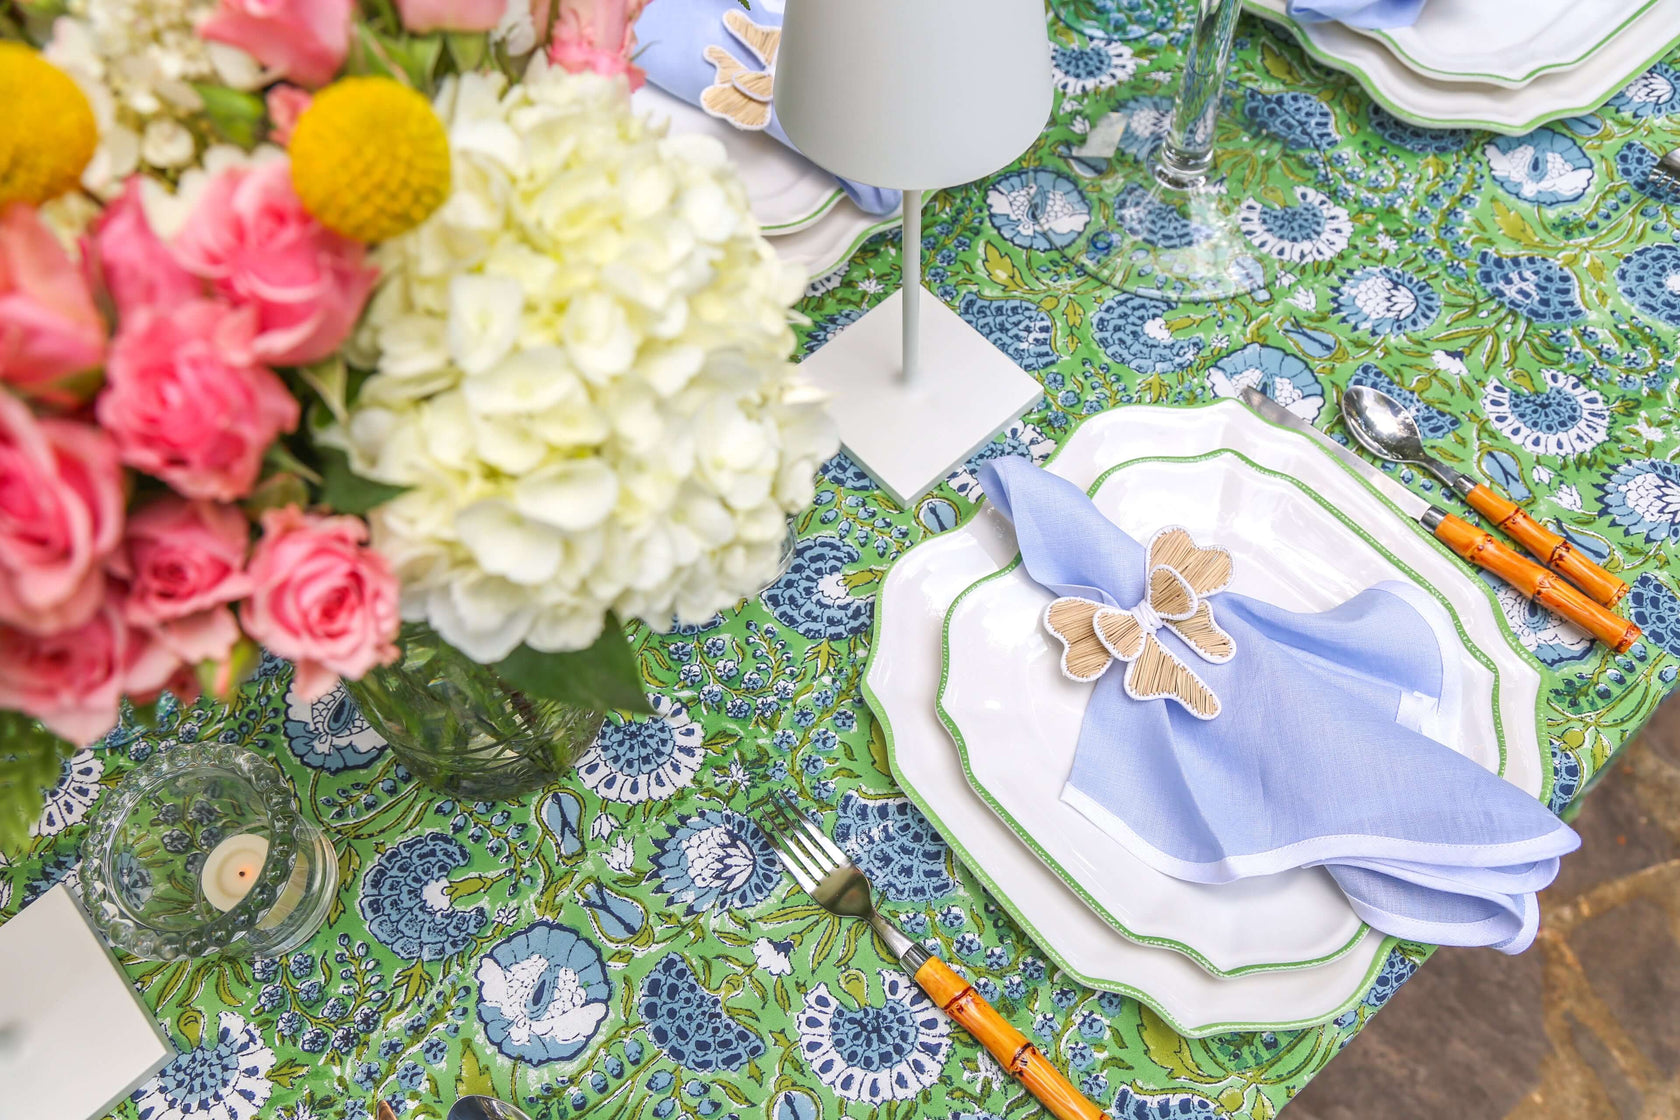 block printed table linens with flowers